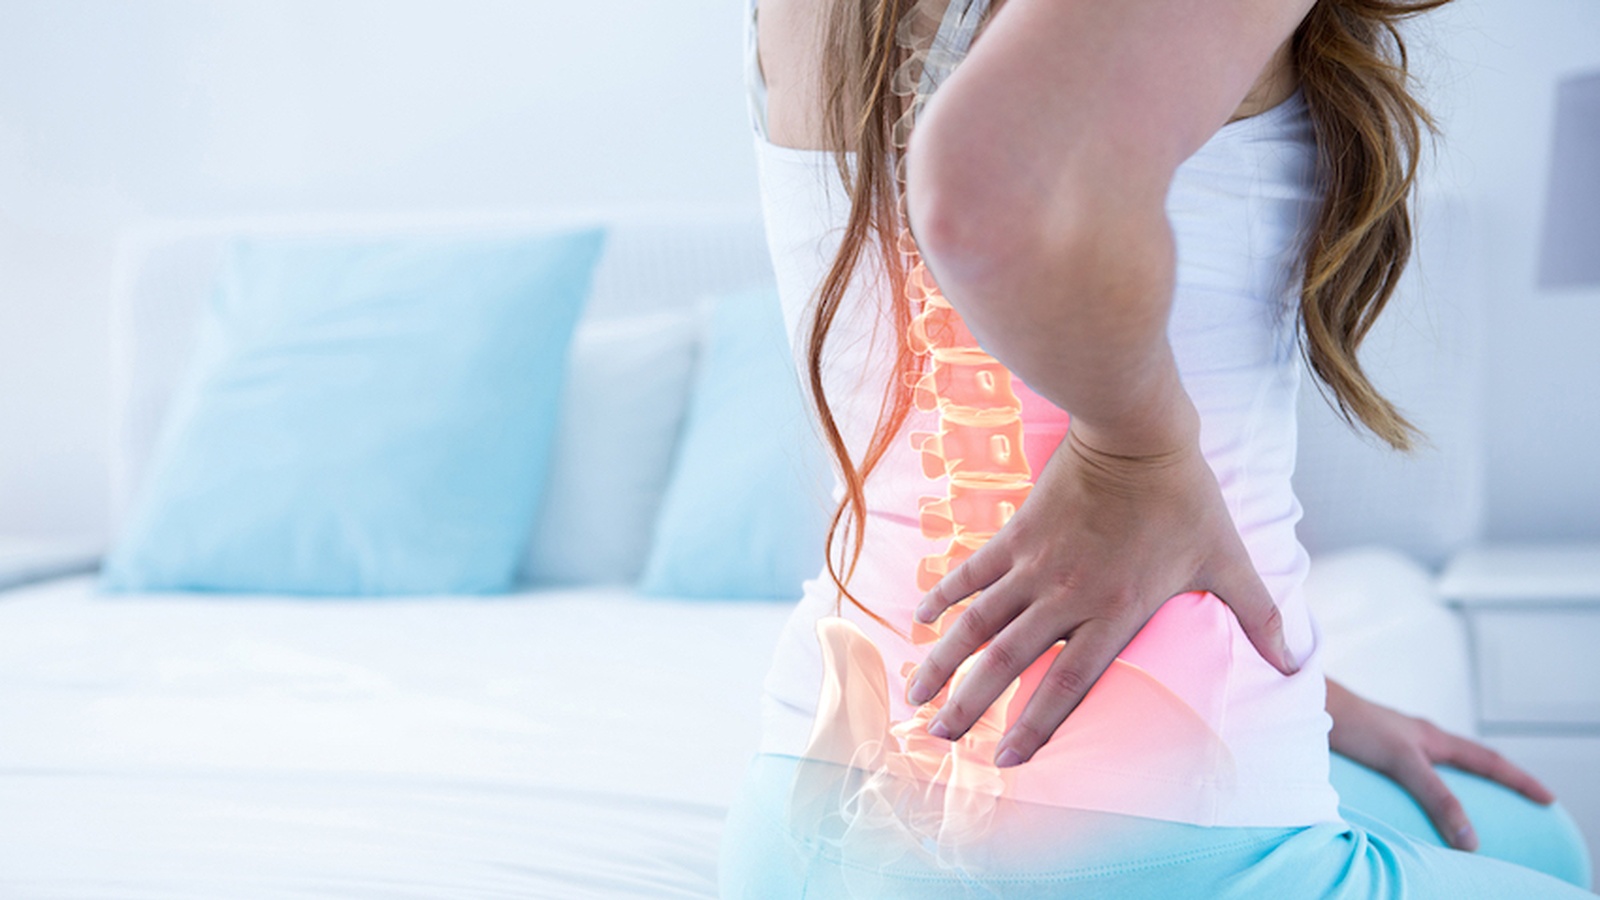 5 Back Pain Prevention Exercises You Can Do Anywhere